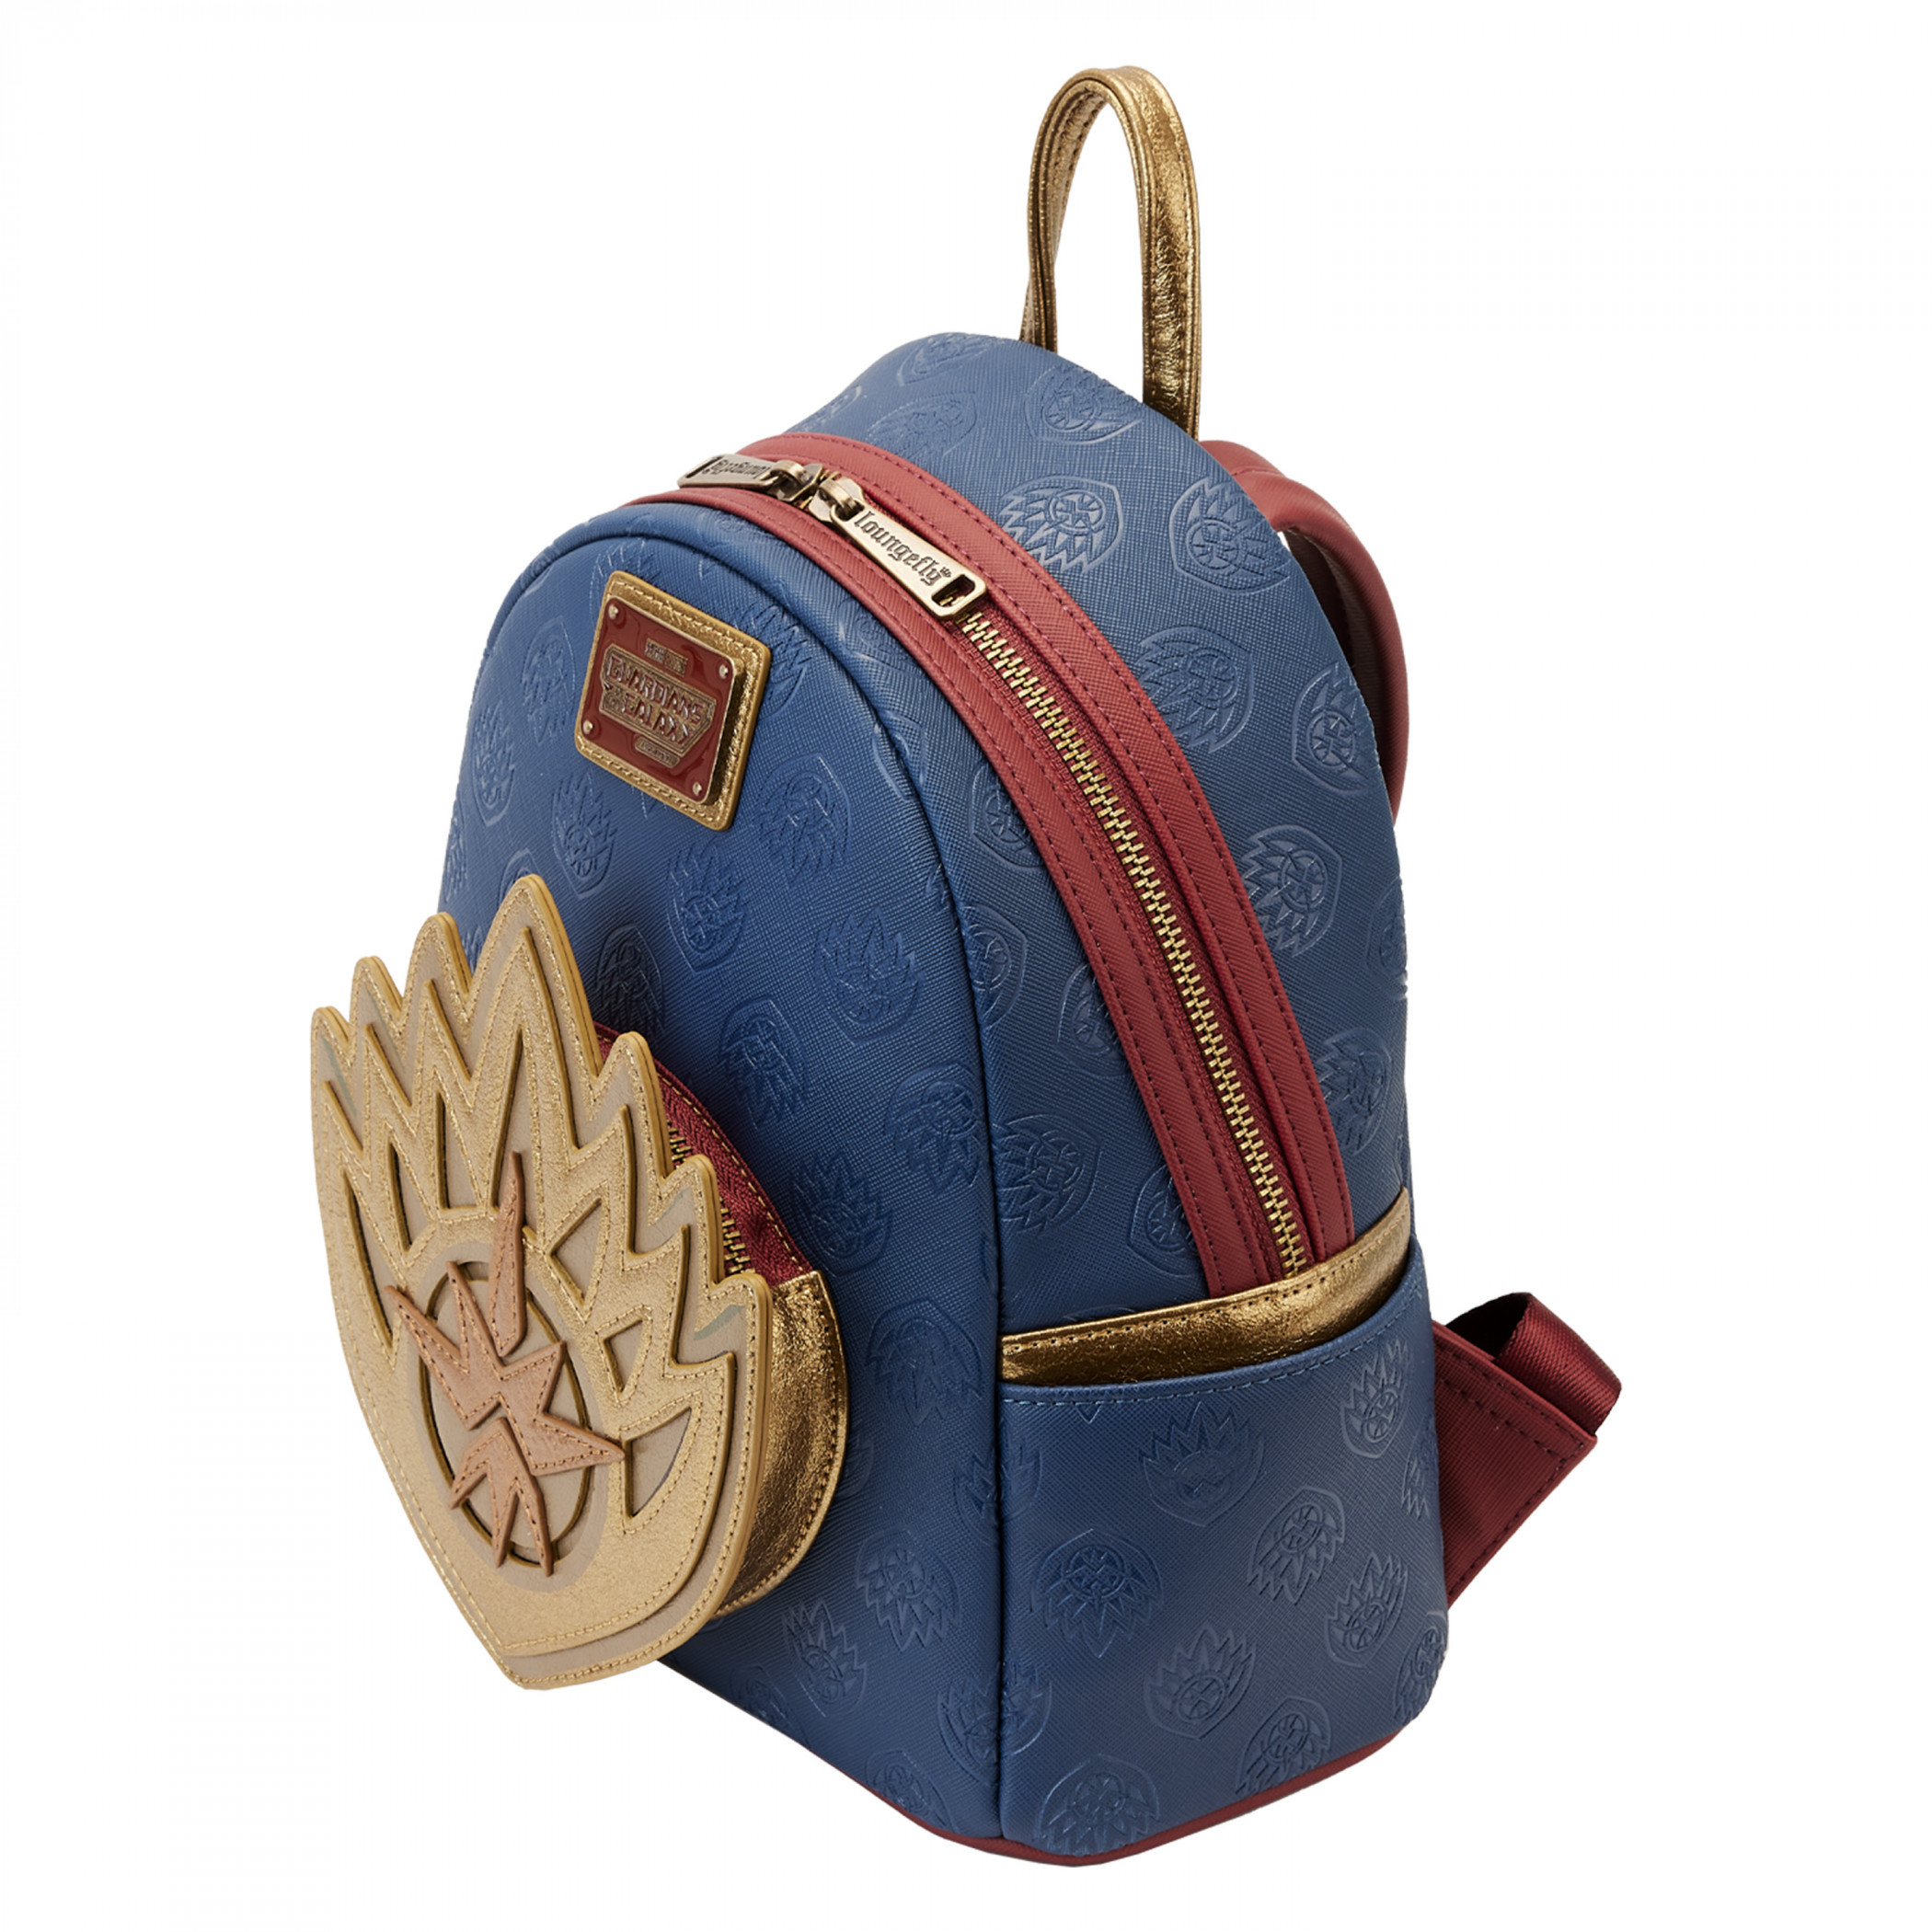 Guardians of The Galaxy Ravager Badge Mini Backpack By Loungefly